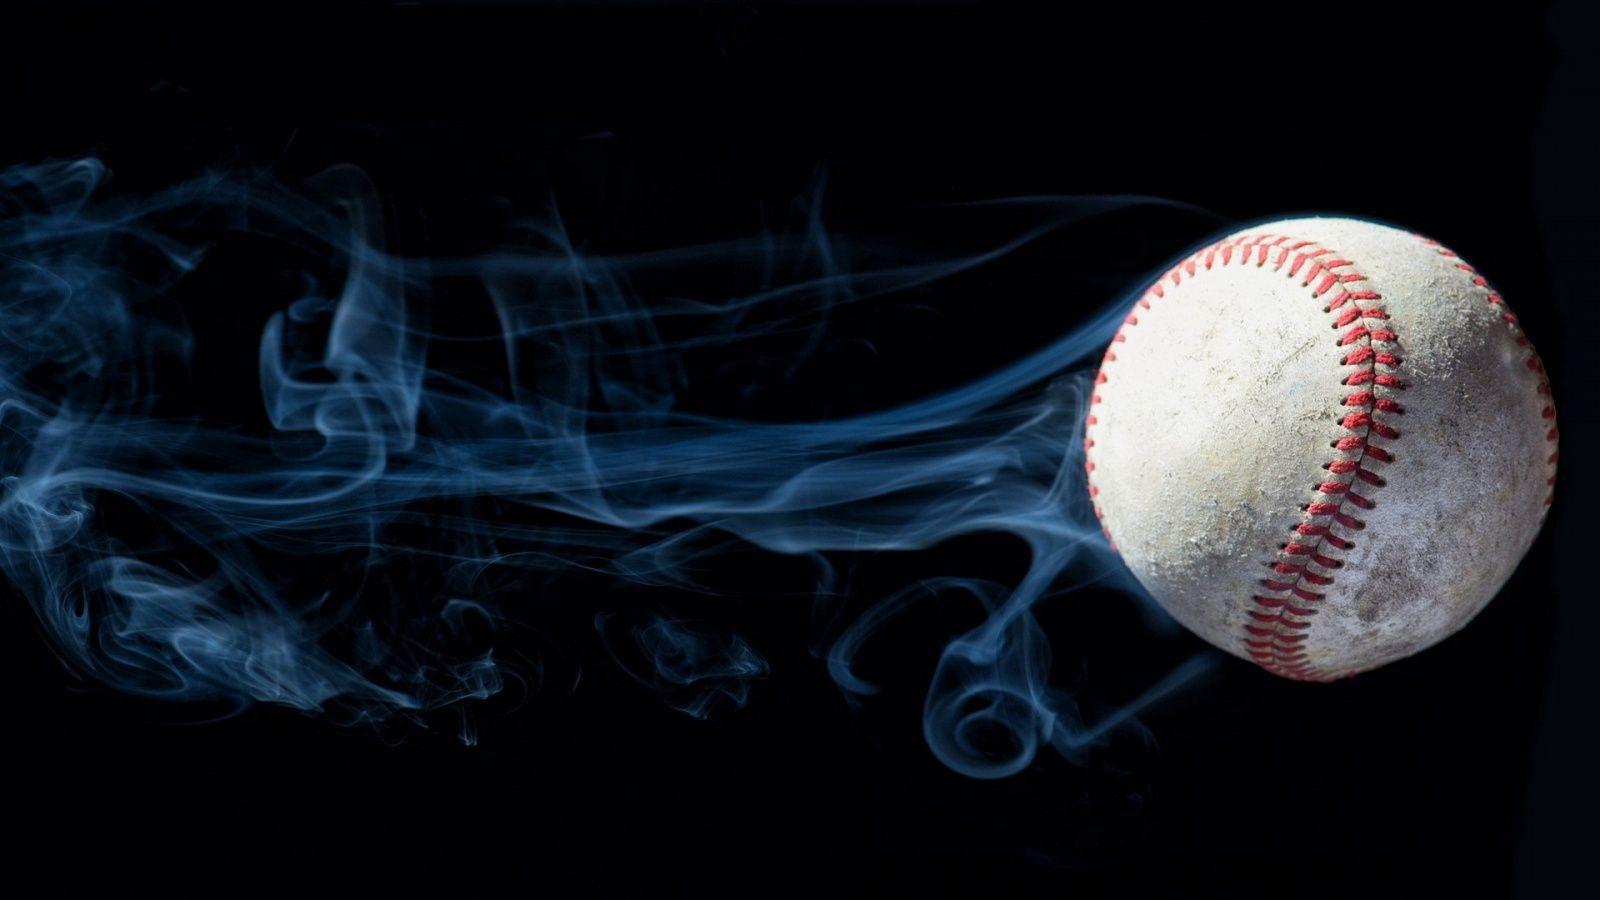 28179 Softball Background Images Stock Photos  Vectors  Shutterstock